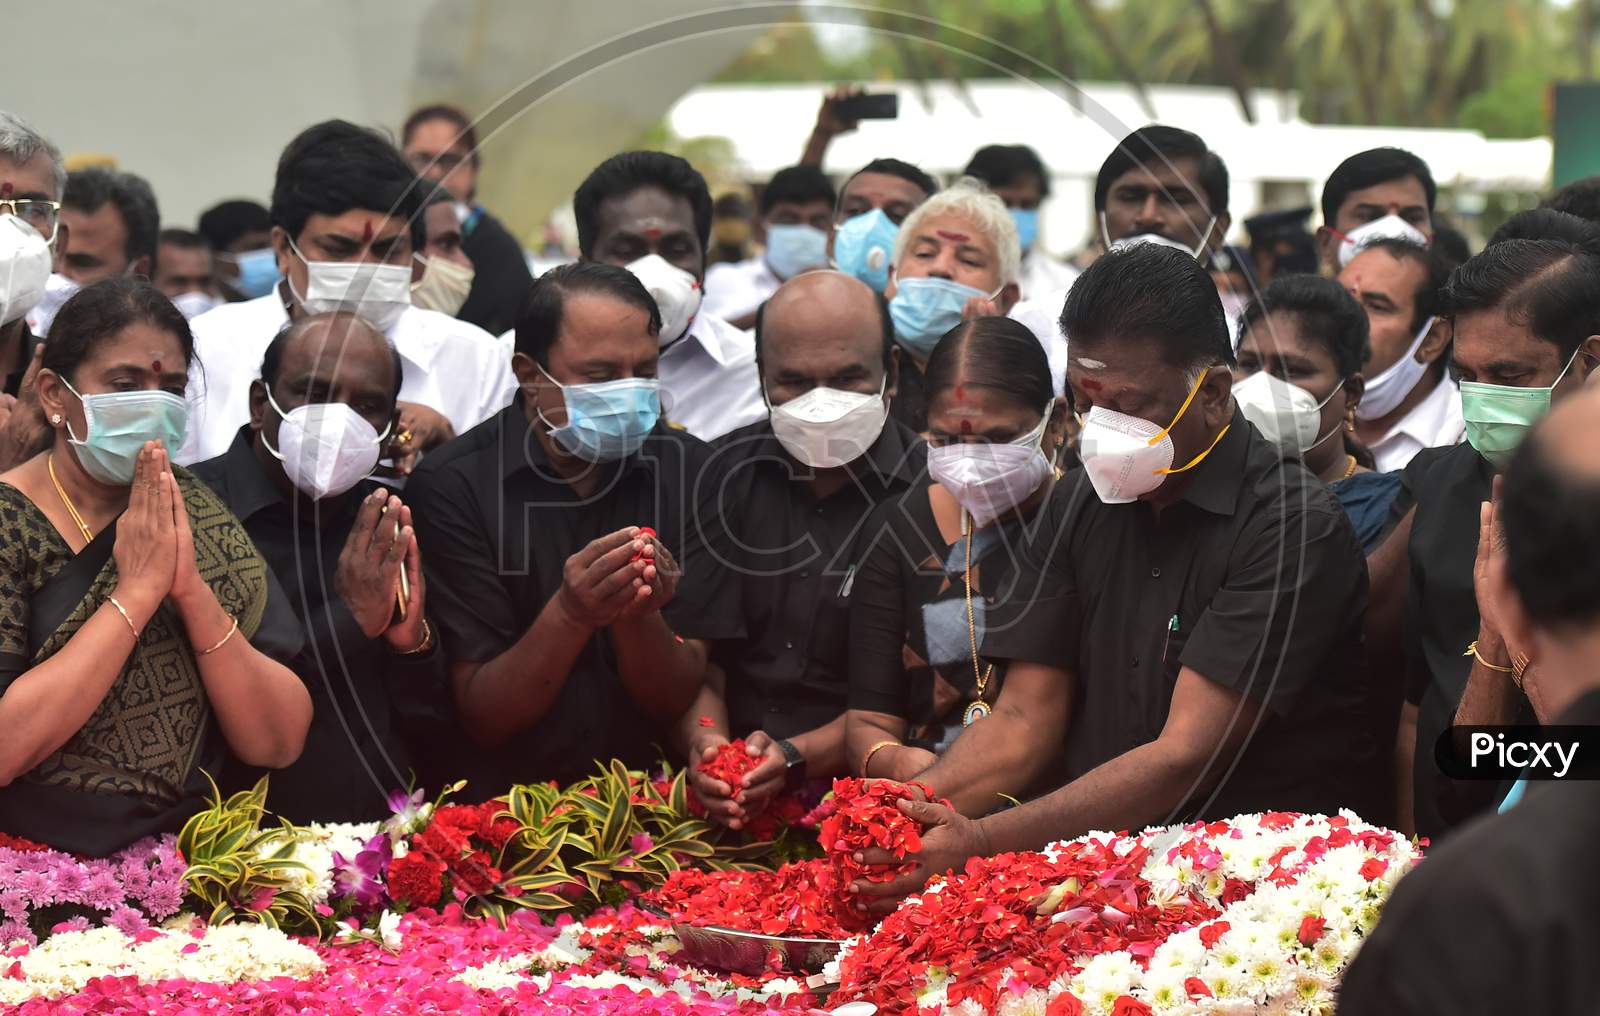 Tamil Nadu Chief Minister Edappadi K Palaniswami, Deputy Chief Minister O Panneerselvam And Aiadmk Senior Leaders Pay Tribute To Former Chief Minister Jayalalithaa On Her Fourth Death Anniversary, In Chennai, Saturday, Dec. 5, 2020.